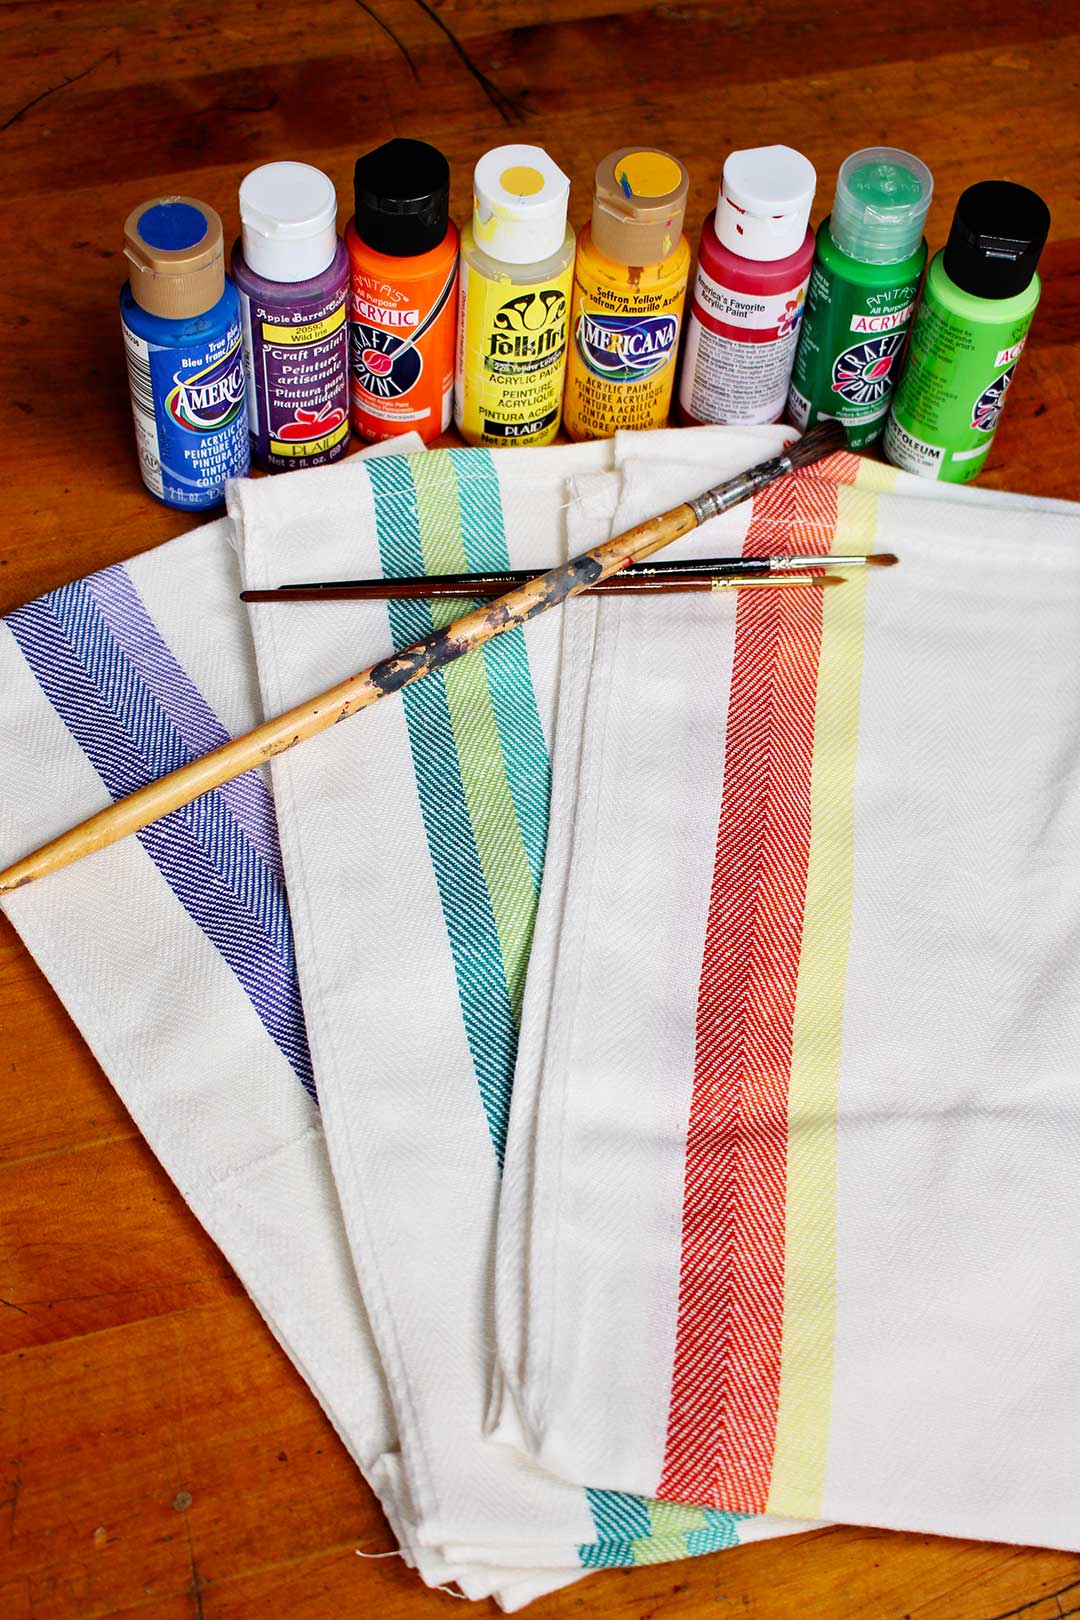 Colorful dish towels, paint brushes, and a rainbow of paint bottles.